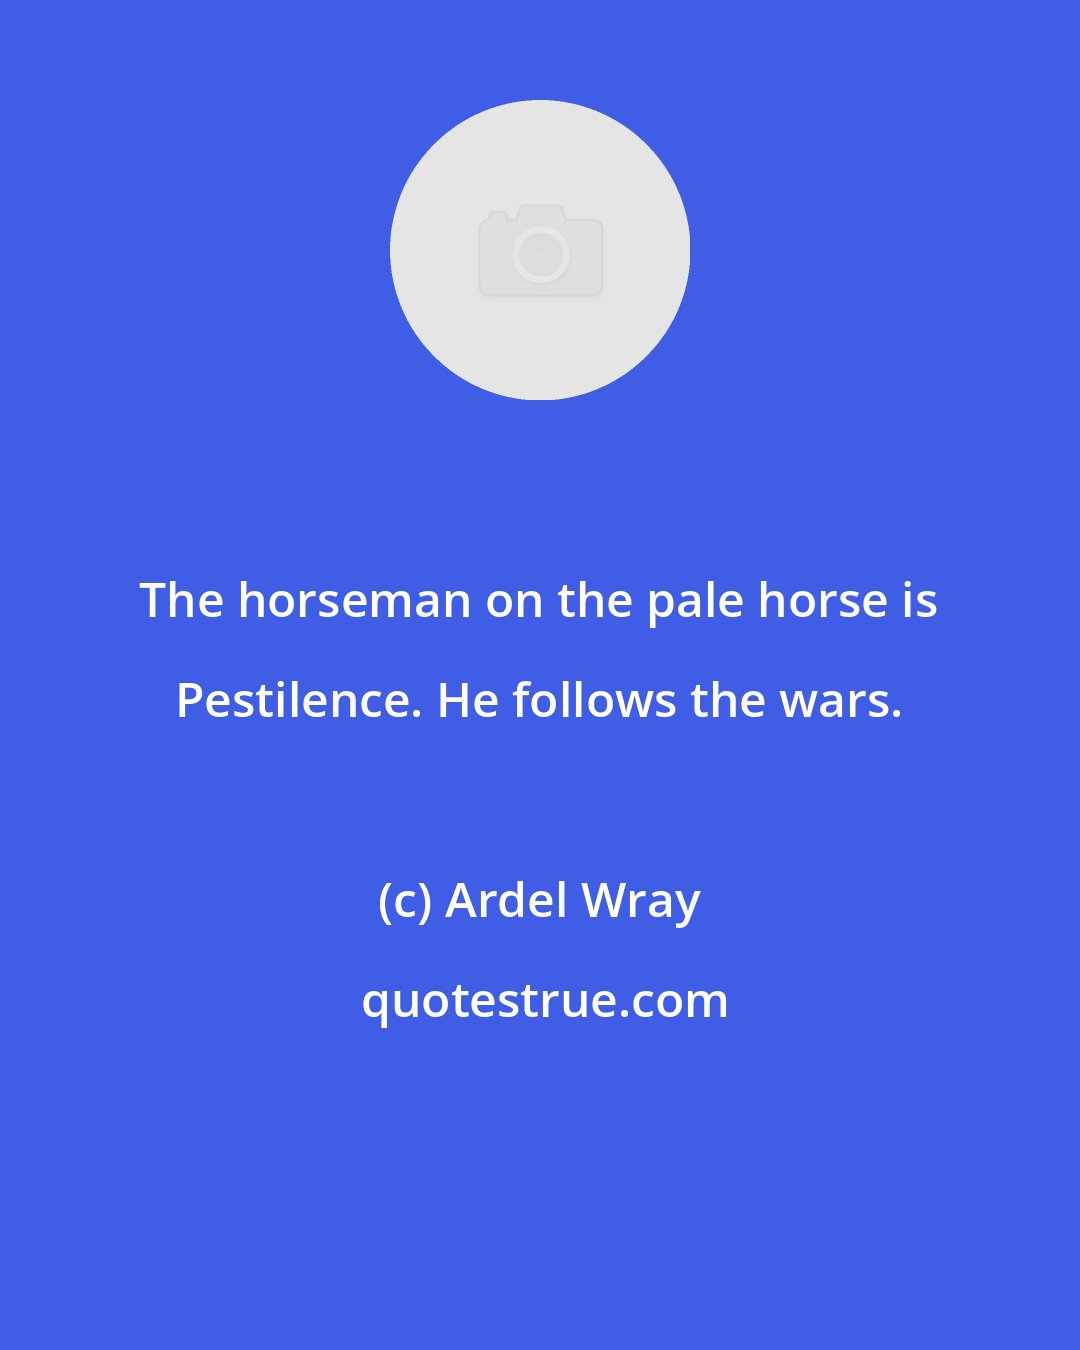 Ardel Wray: The horseman on the pale horse is Pestilence. He follows the wars.